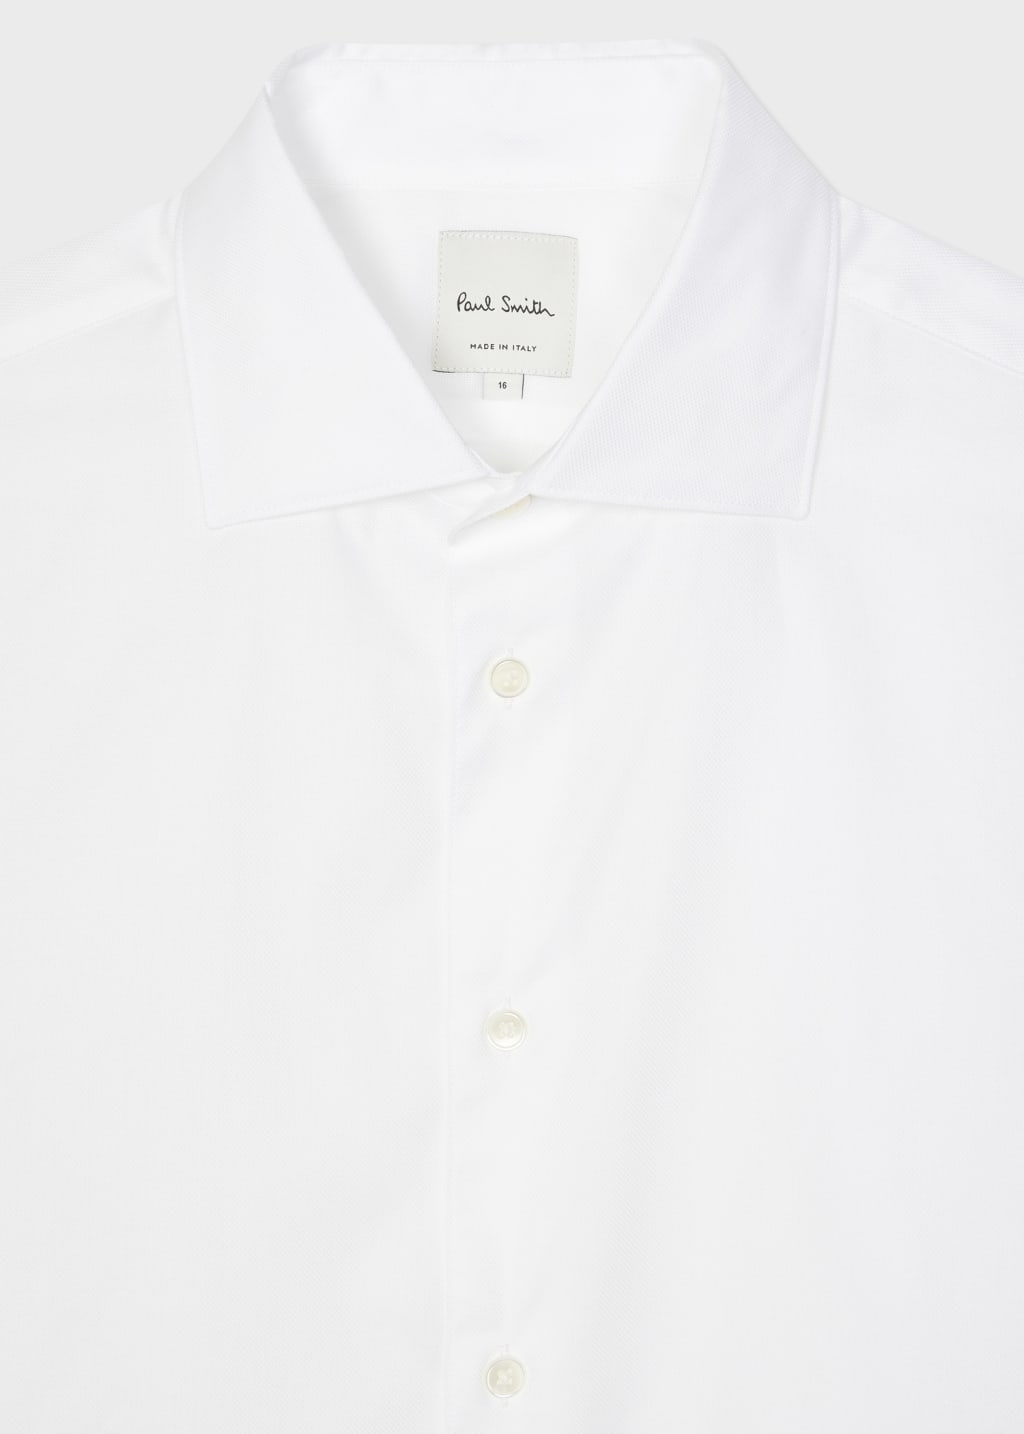 Product view - Slim-Fit White Textured-Cotton Shirt Paul Smith